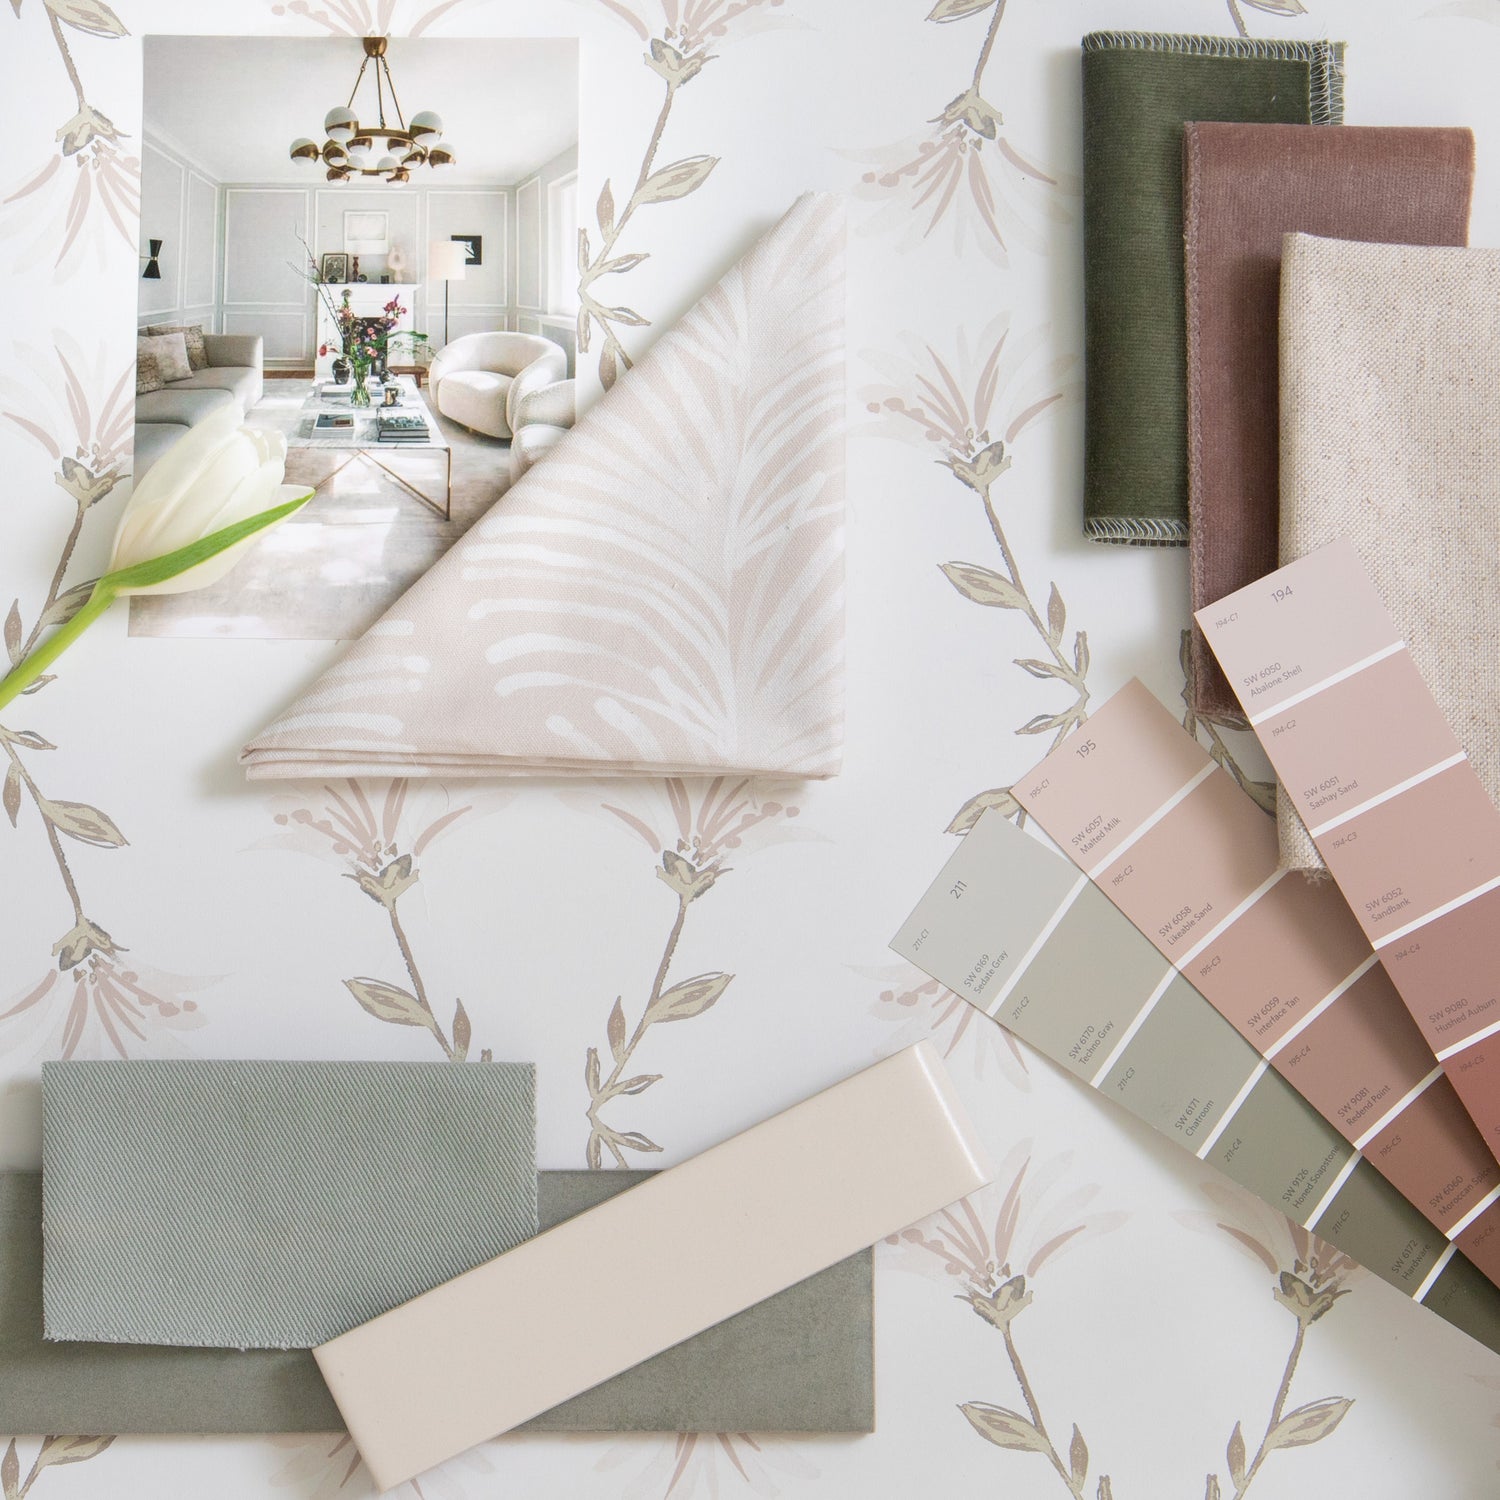 Interior design moodboard and fabric inspirations with Beige Botanical Stripe Printed Swatch, Fern Green Velvet Swatch, Brown Velvet Swatch and Cream Floral Wallpaper